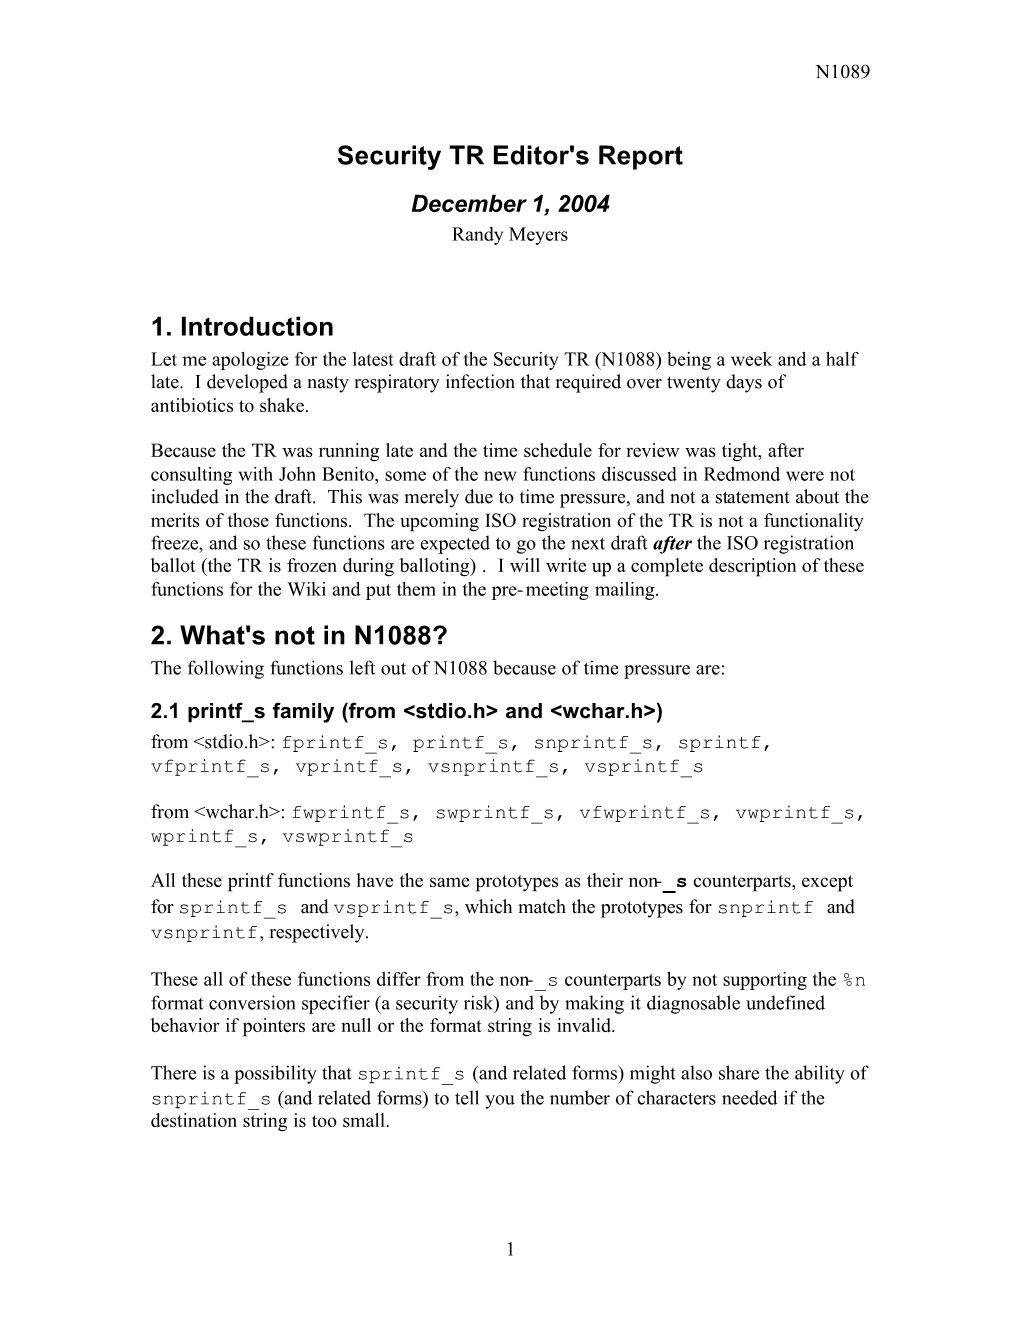 Security TR Editor's Report 1. Introduction 2. What's Not in N1088?